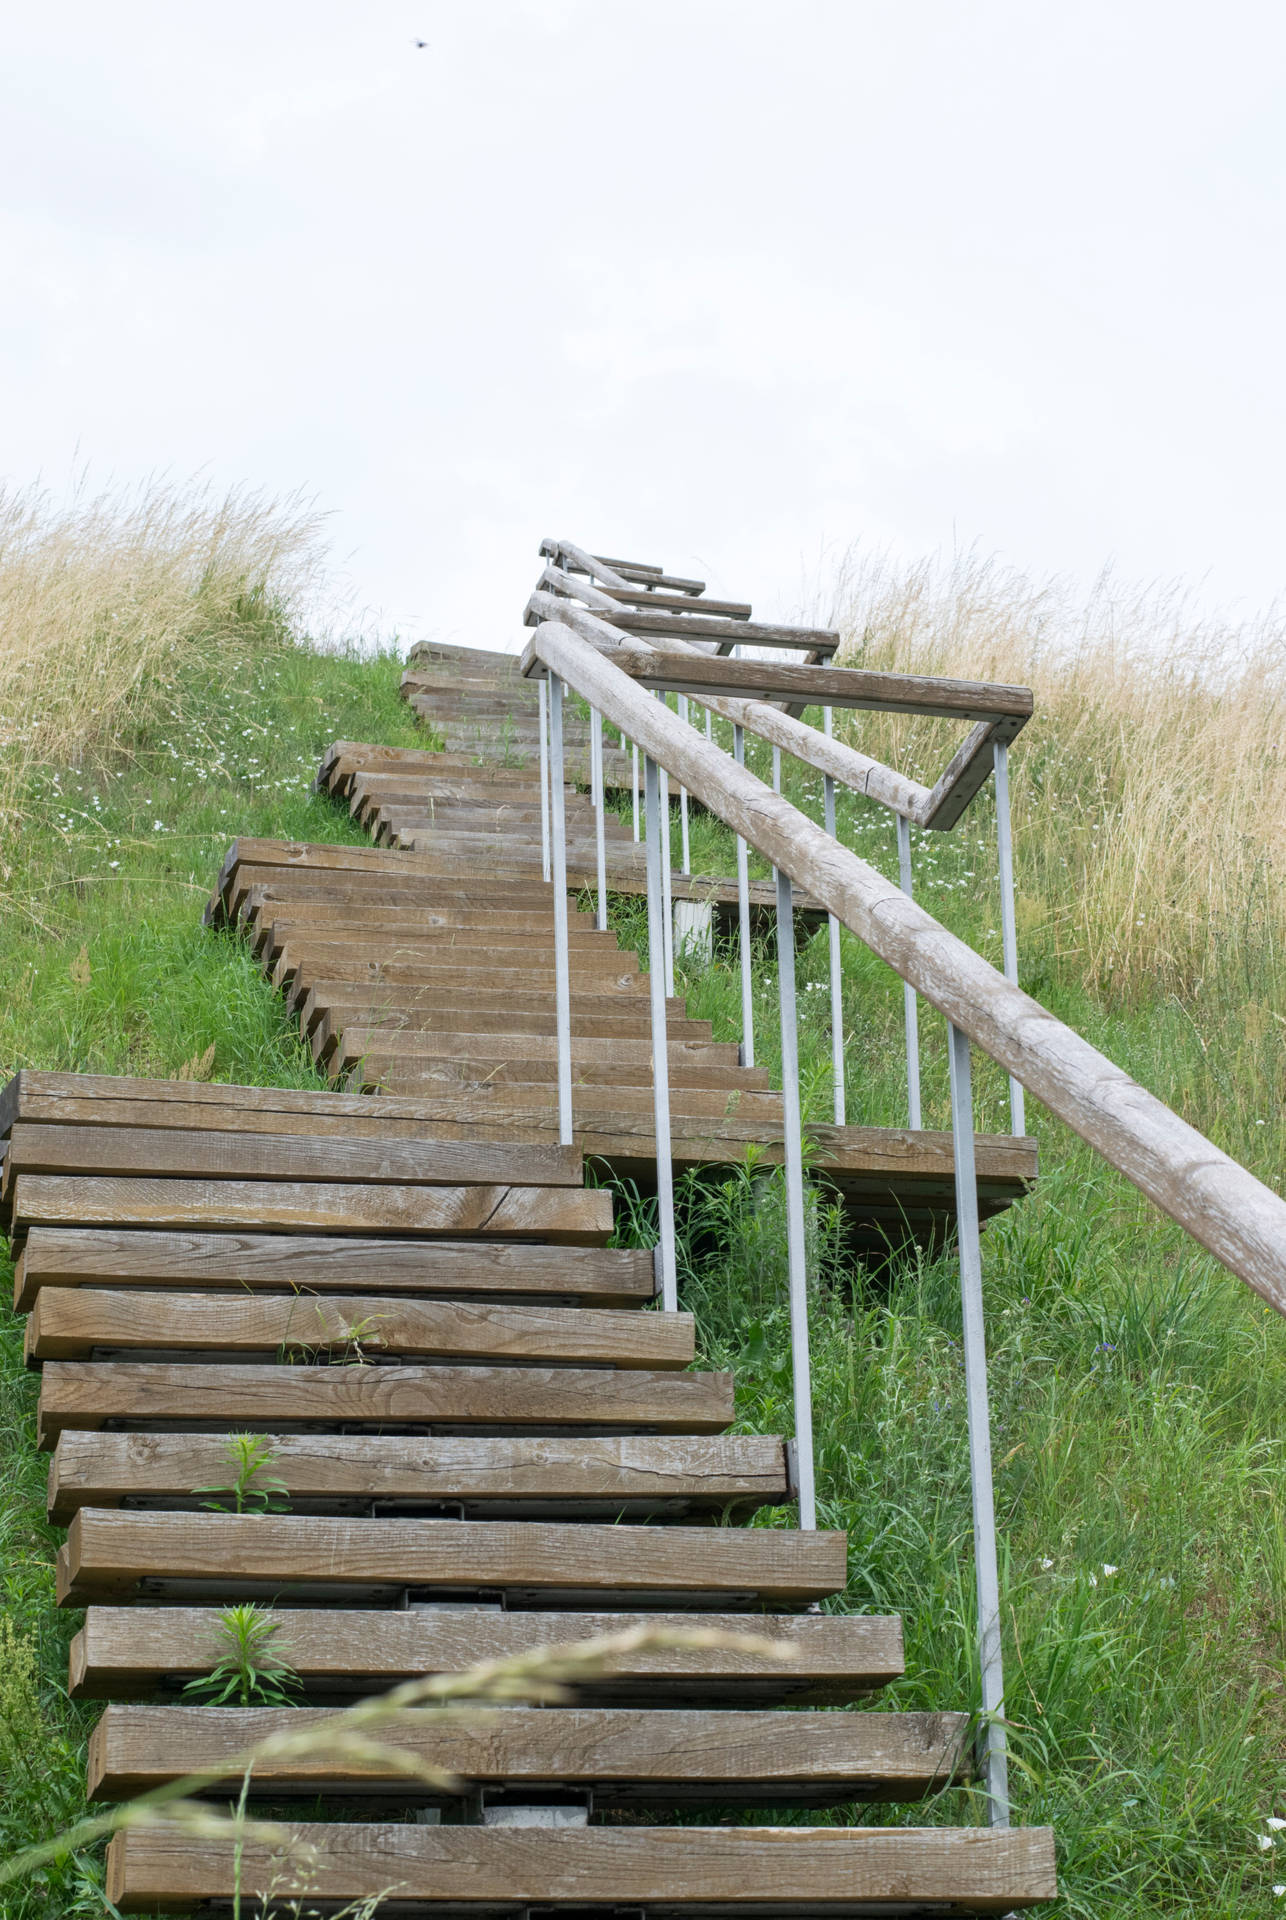 Wooden Staircase Surrounded By Grass In Lithuania